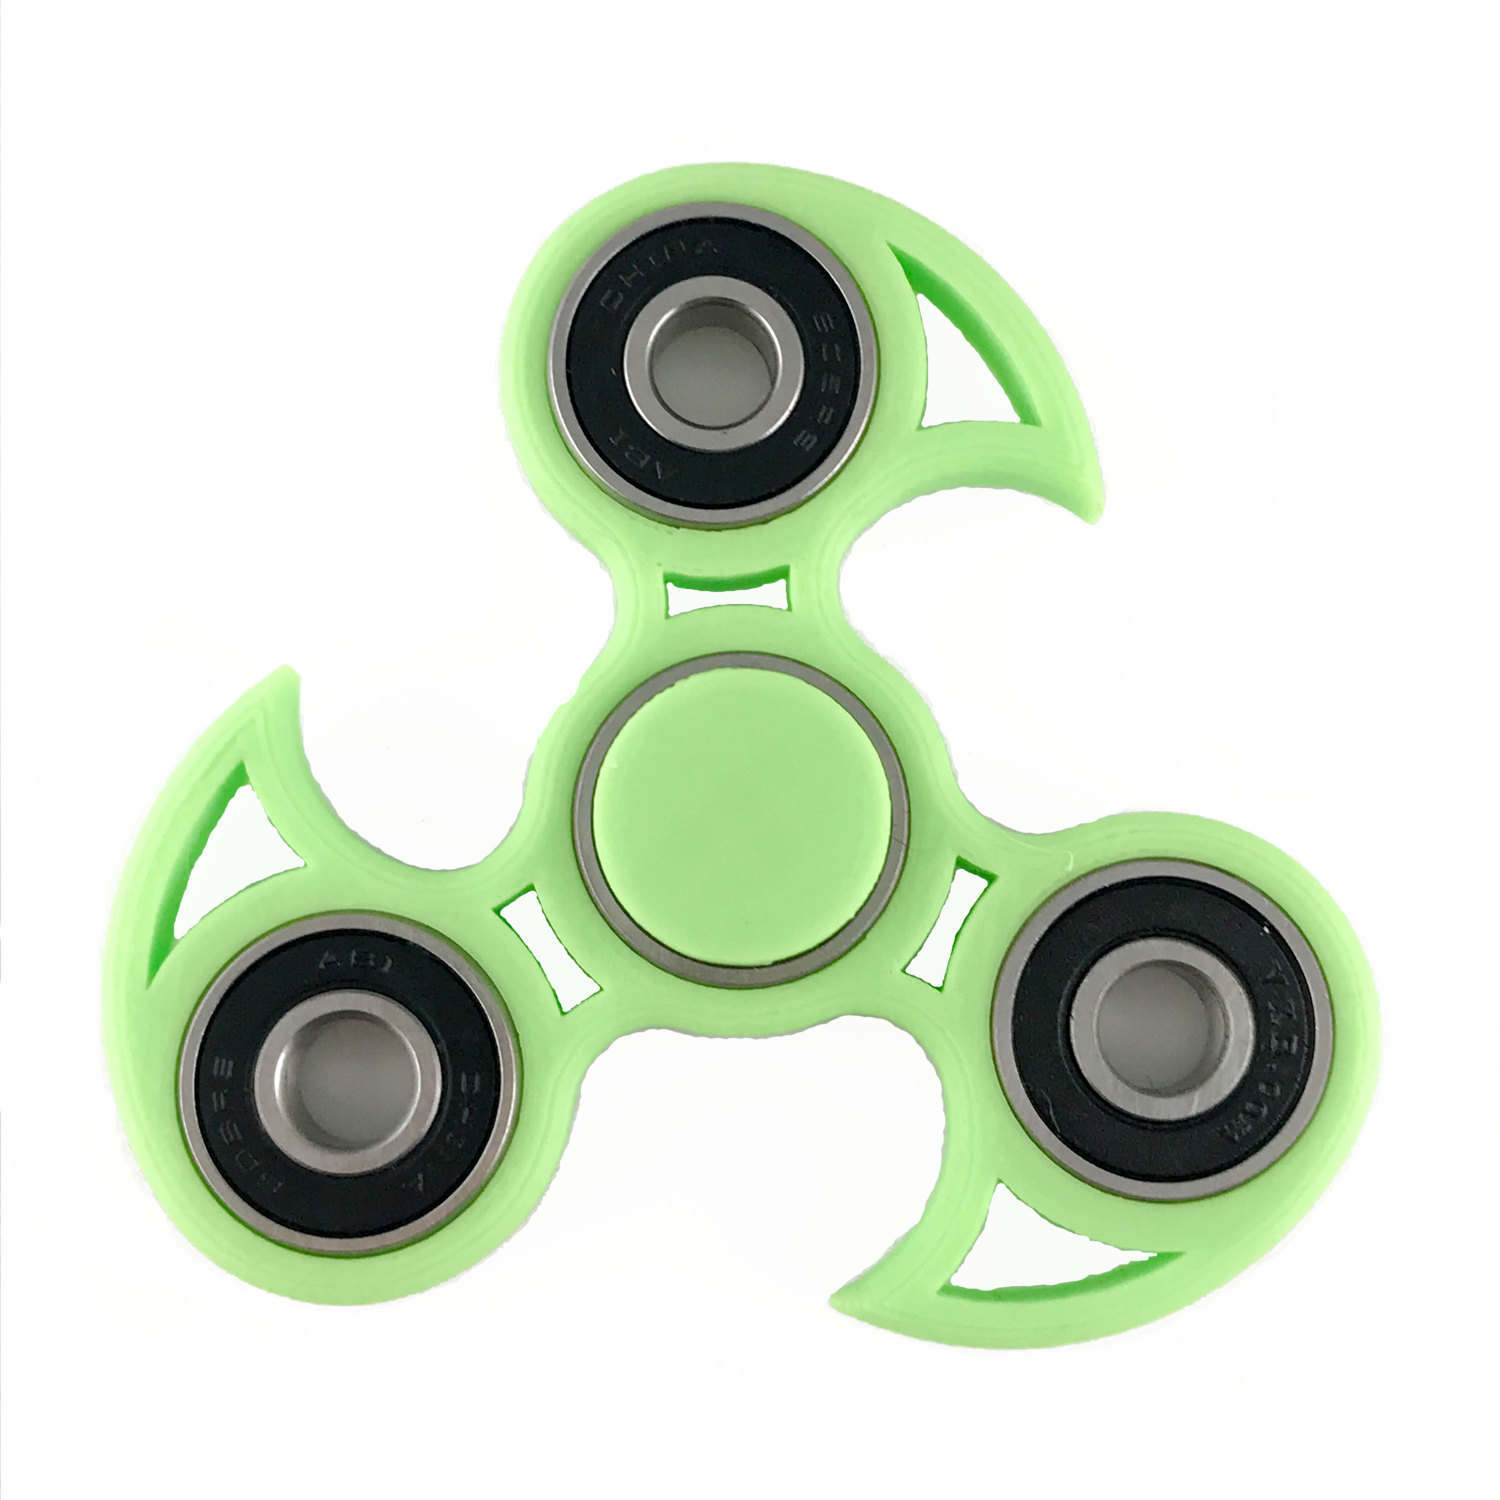 Tri-spinner fidget toy fidget spinners relieves your ADHD